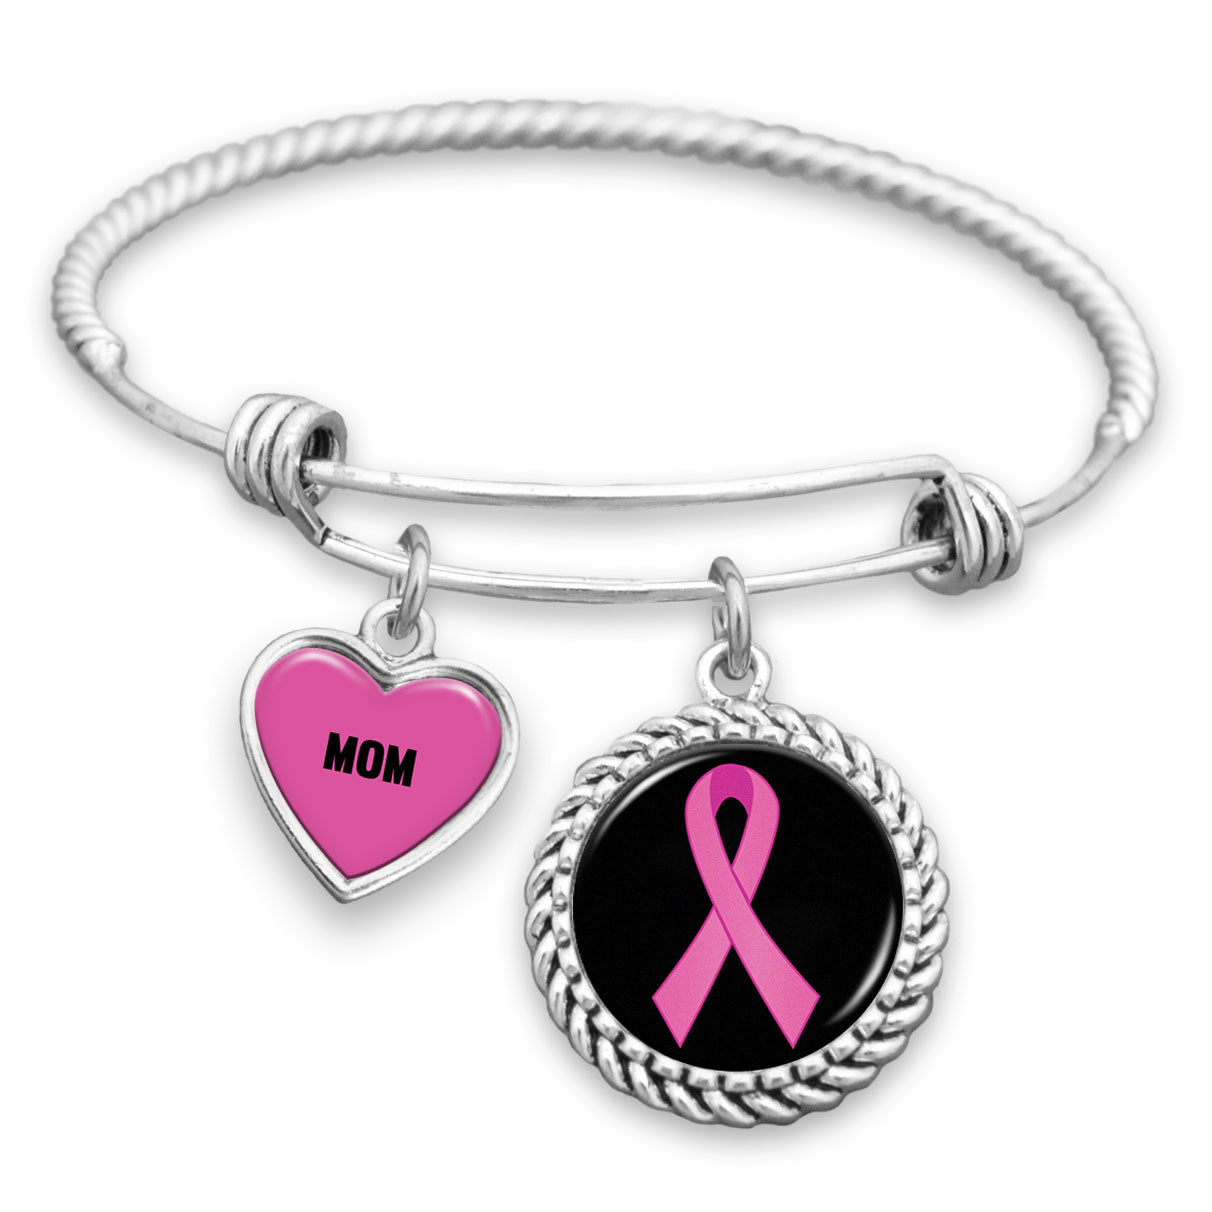 Personalized Breast Cancer Awareness Ribbon Charm Bracelet